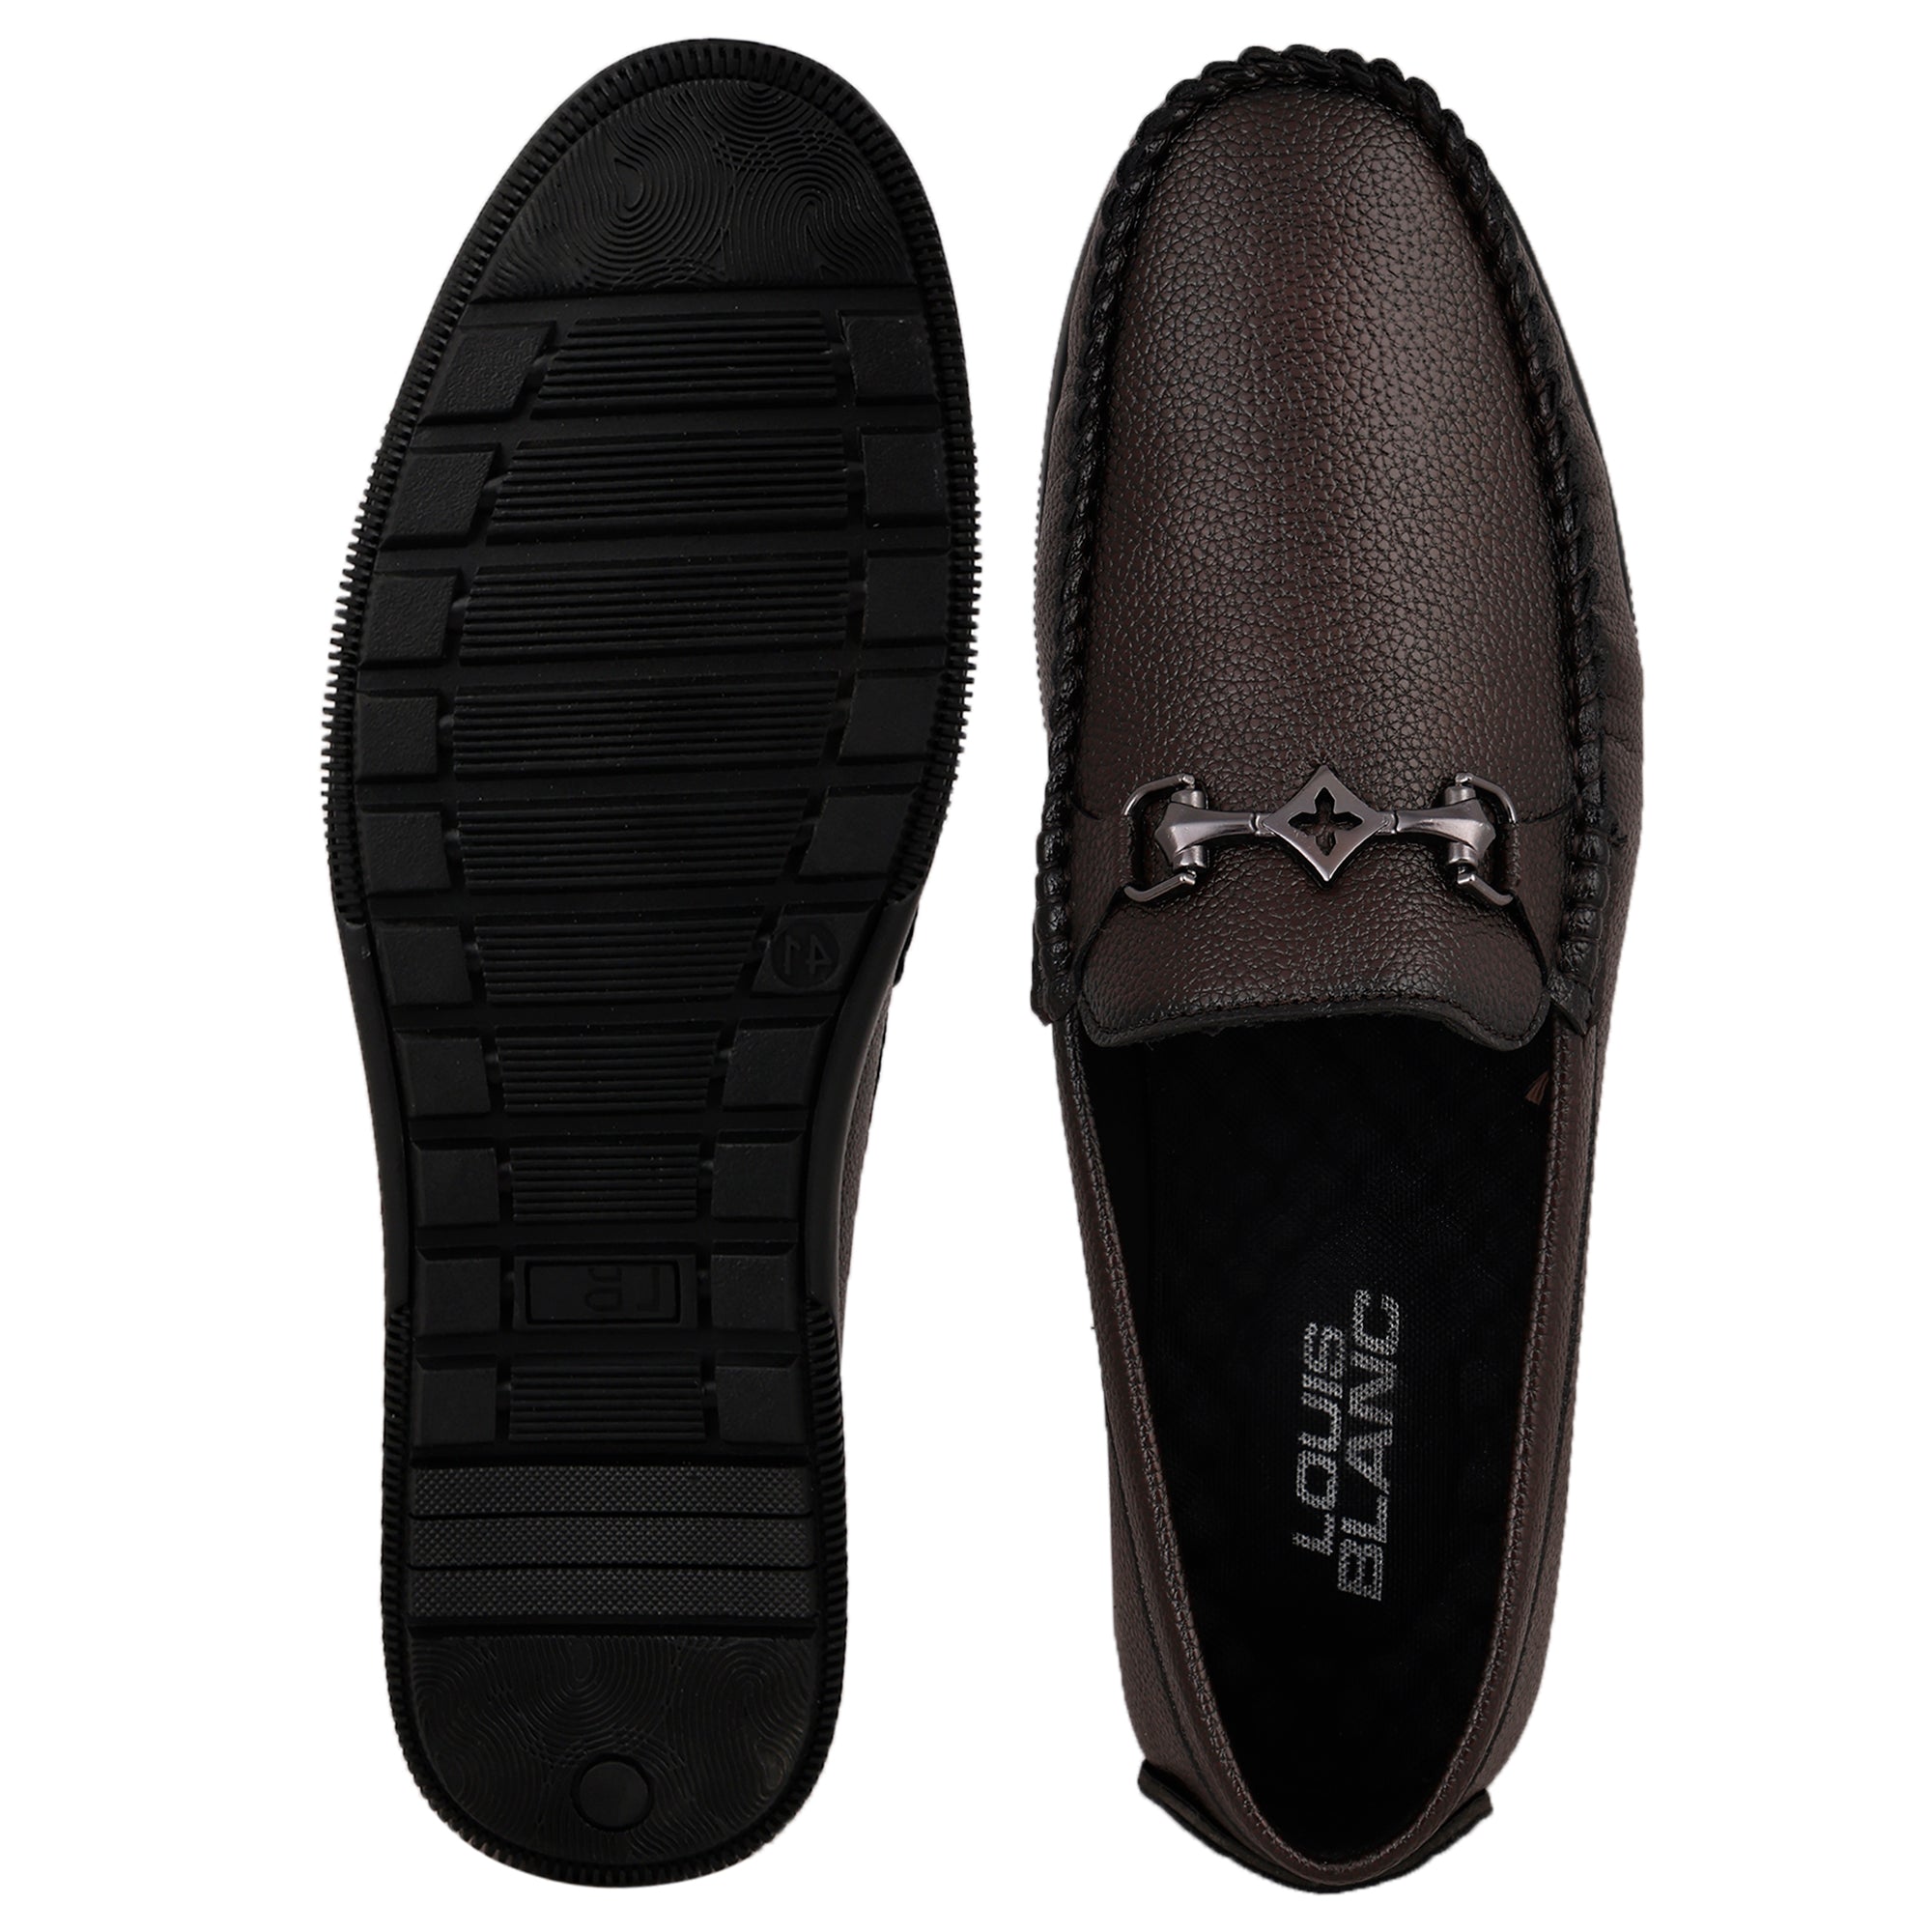 LB 38A Abelmo  Brown Slip On Style Loafer Most Comfortable Doctor Insole With Wrinkle Free Fox Leather Loafers.